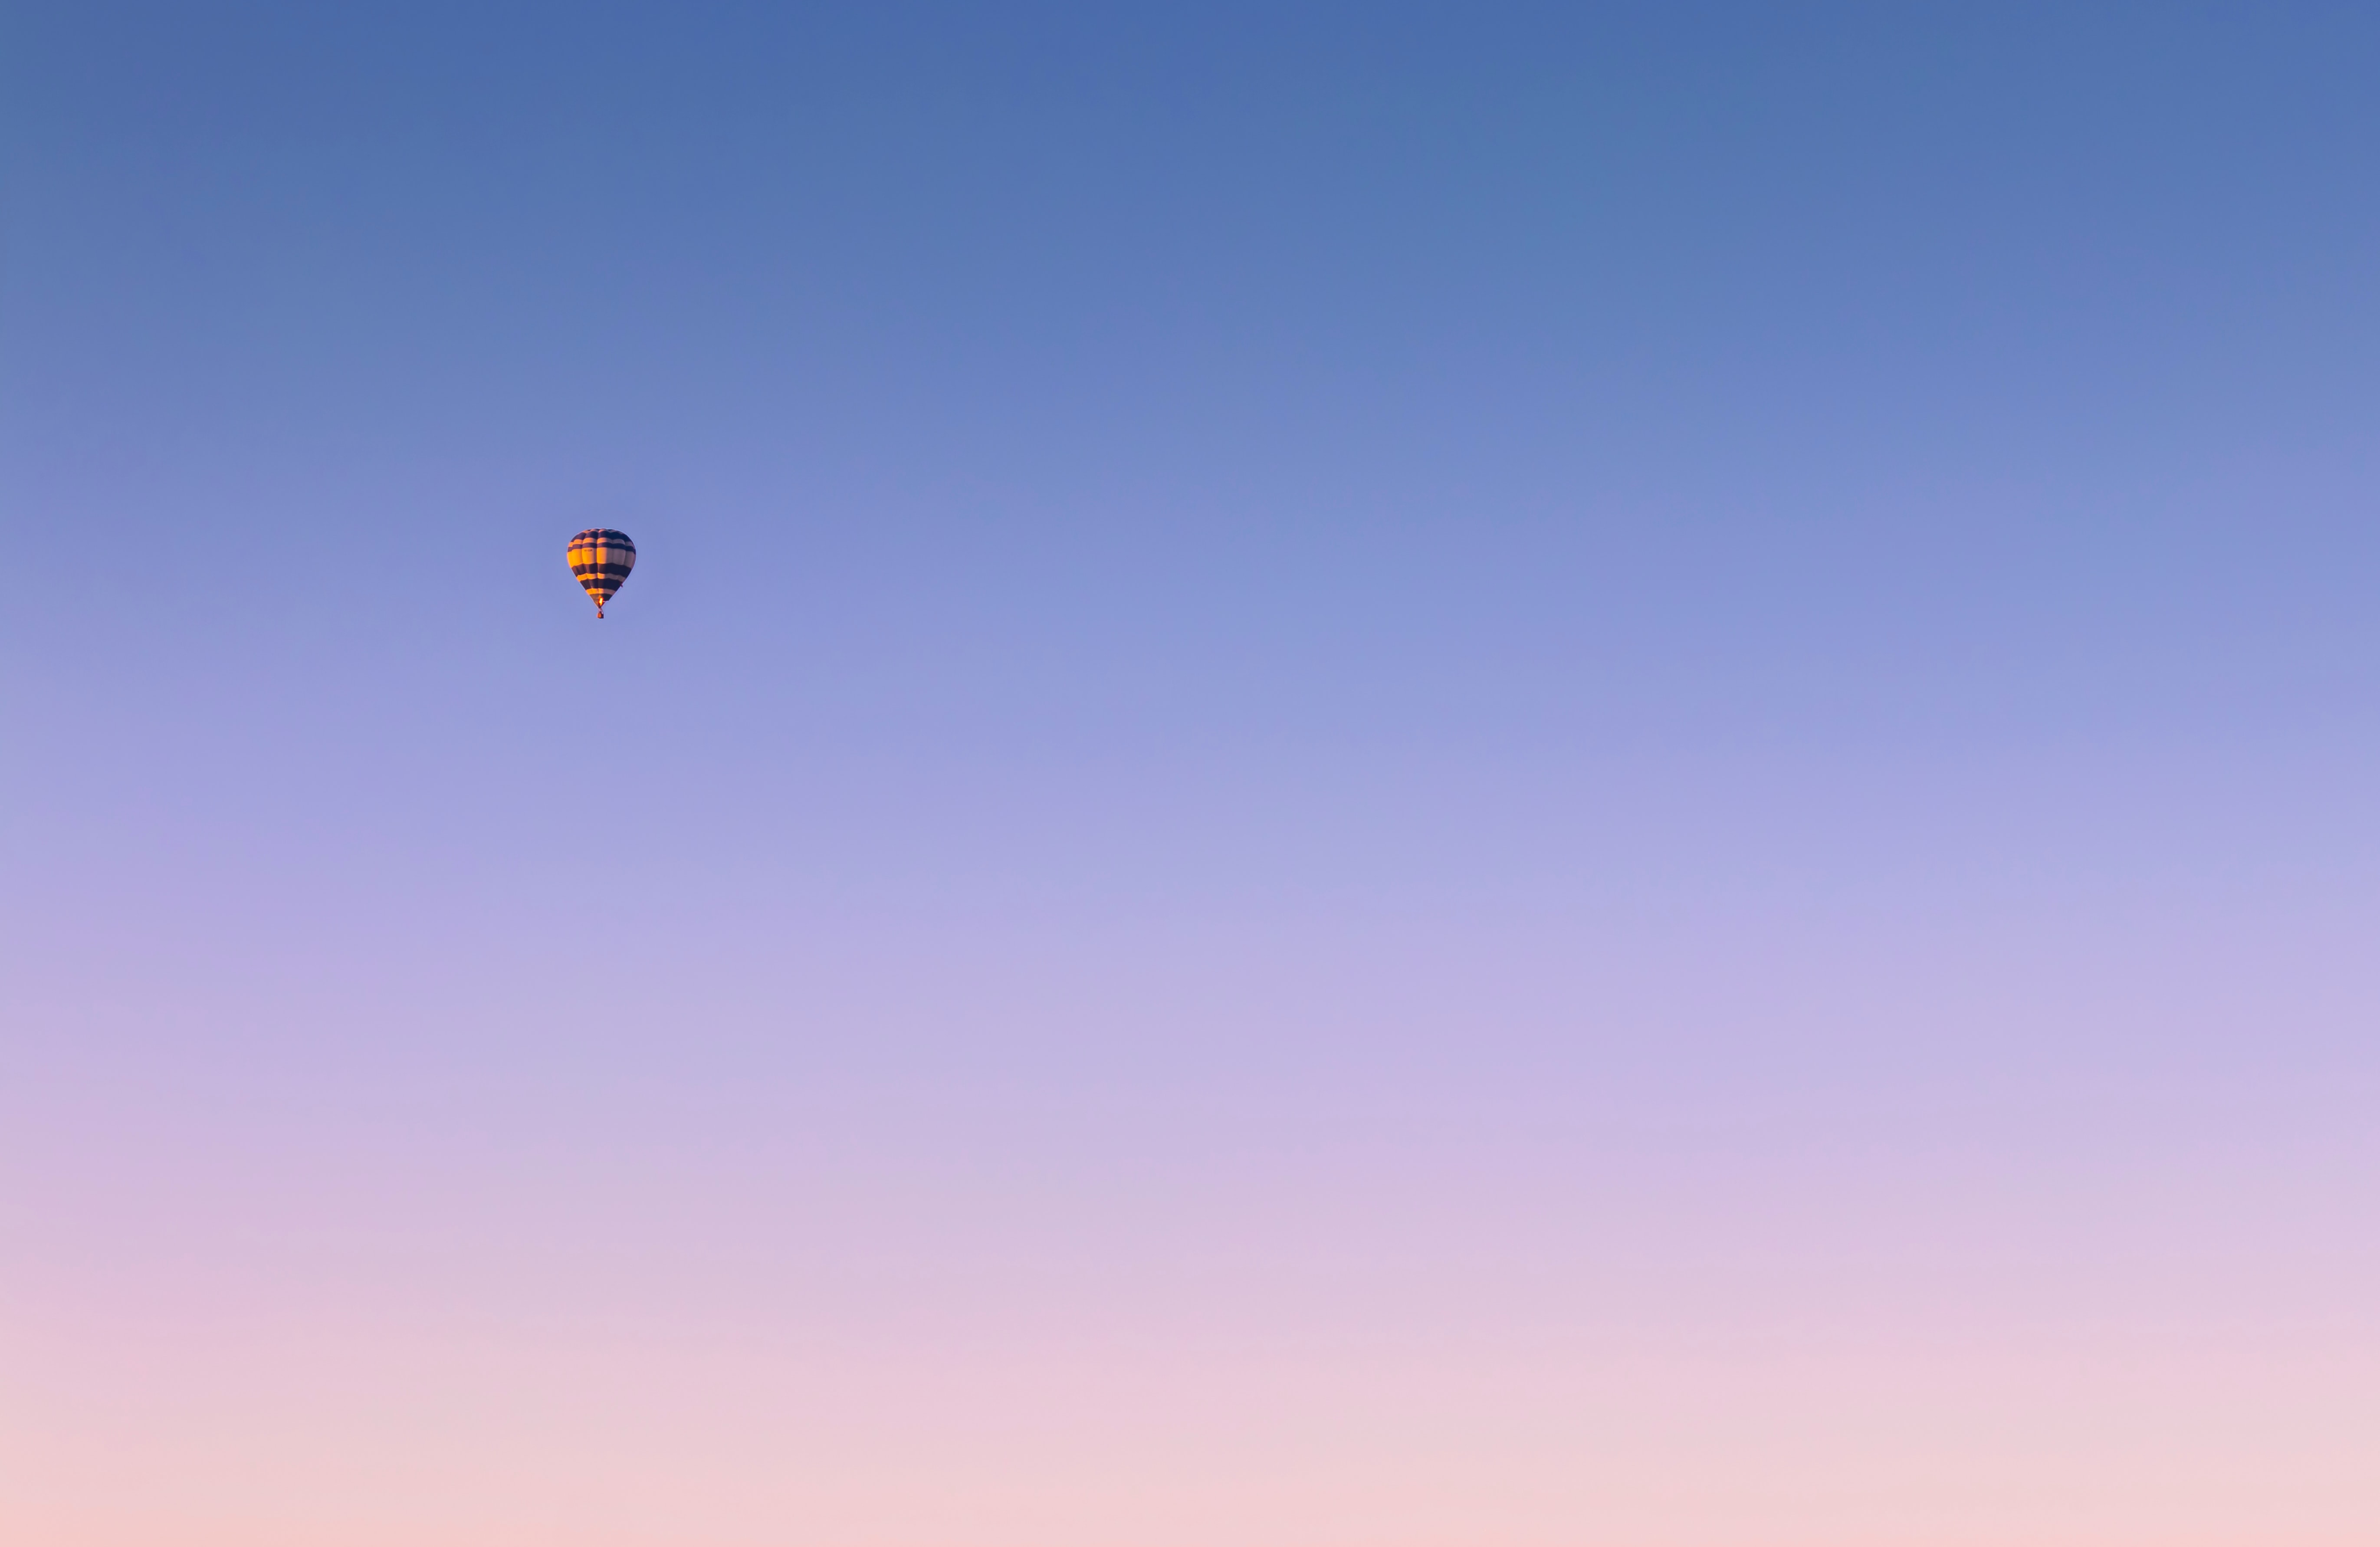 121792 download wallpaper sky, minimalism, flight, balloon, gradient screensavers and pictures for free